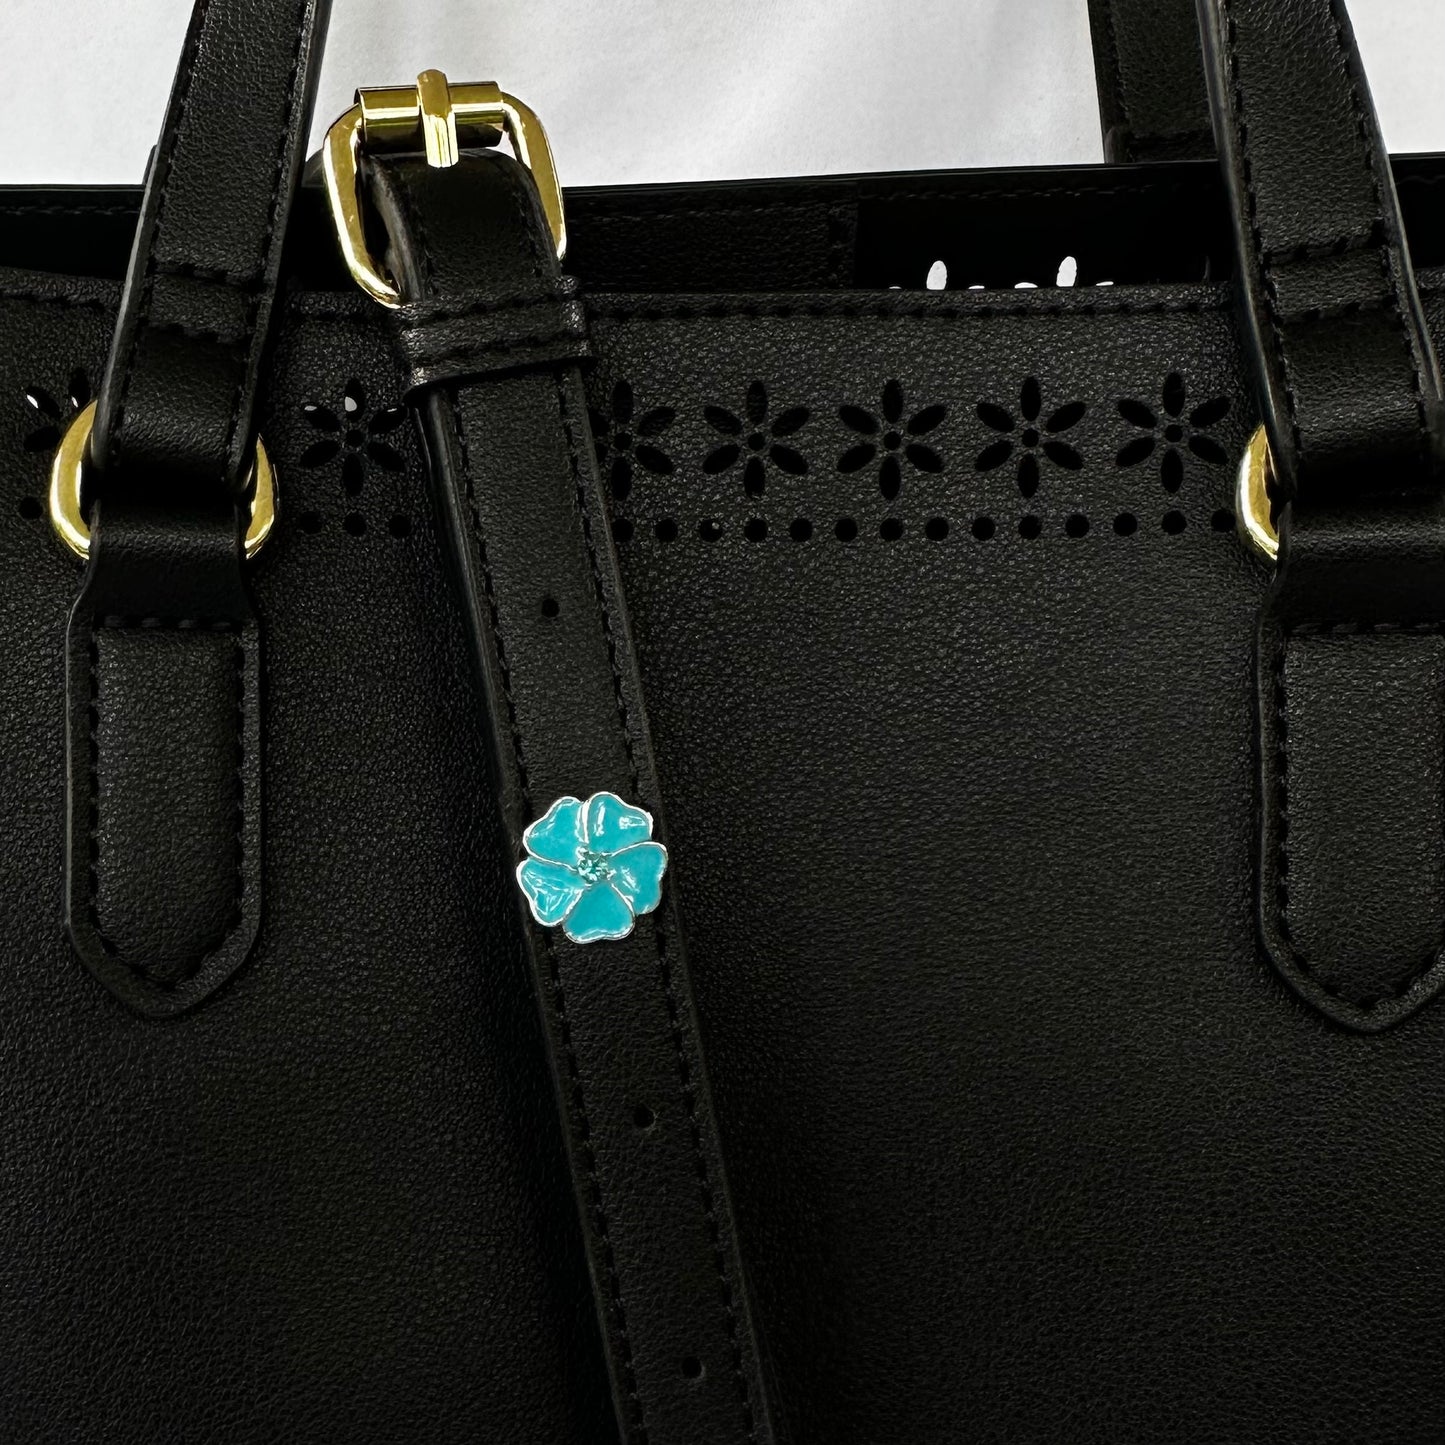 Light Blue Flower Charm for Bags and Belts